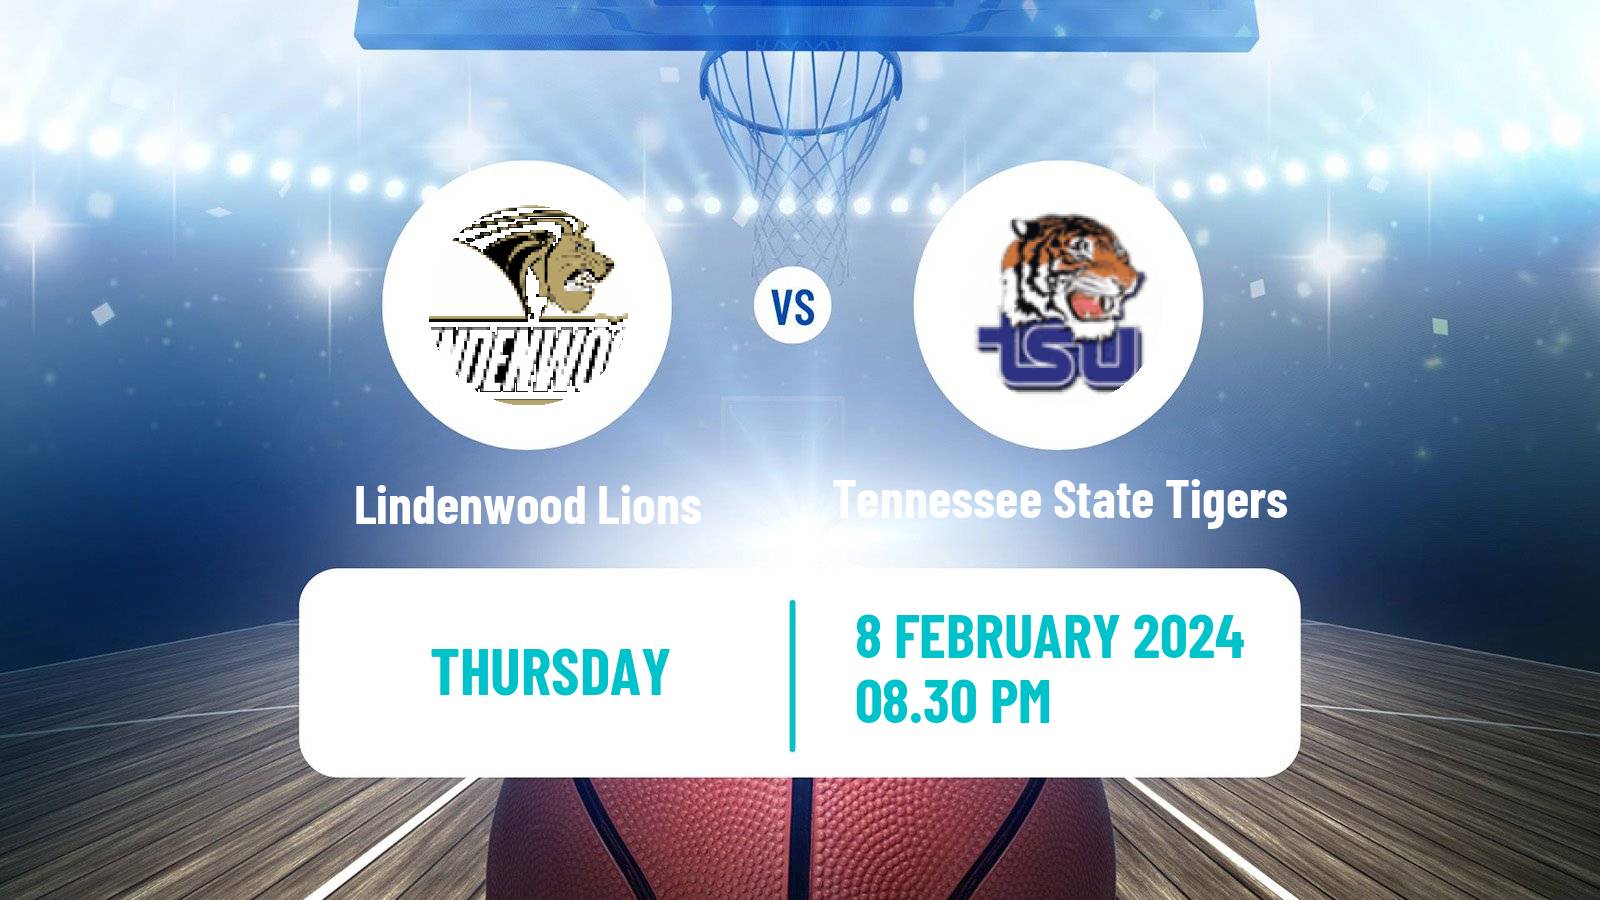 Basketball NCAA College Basketball Lindenwood Lions - Tennessee State Tigers